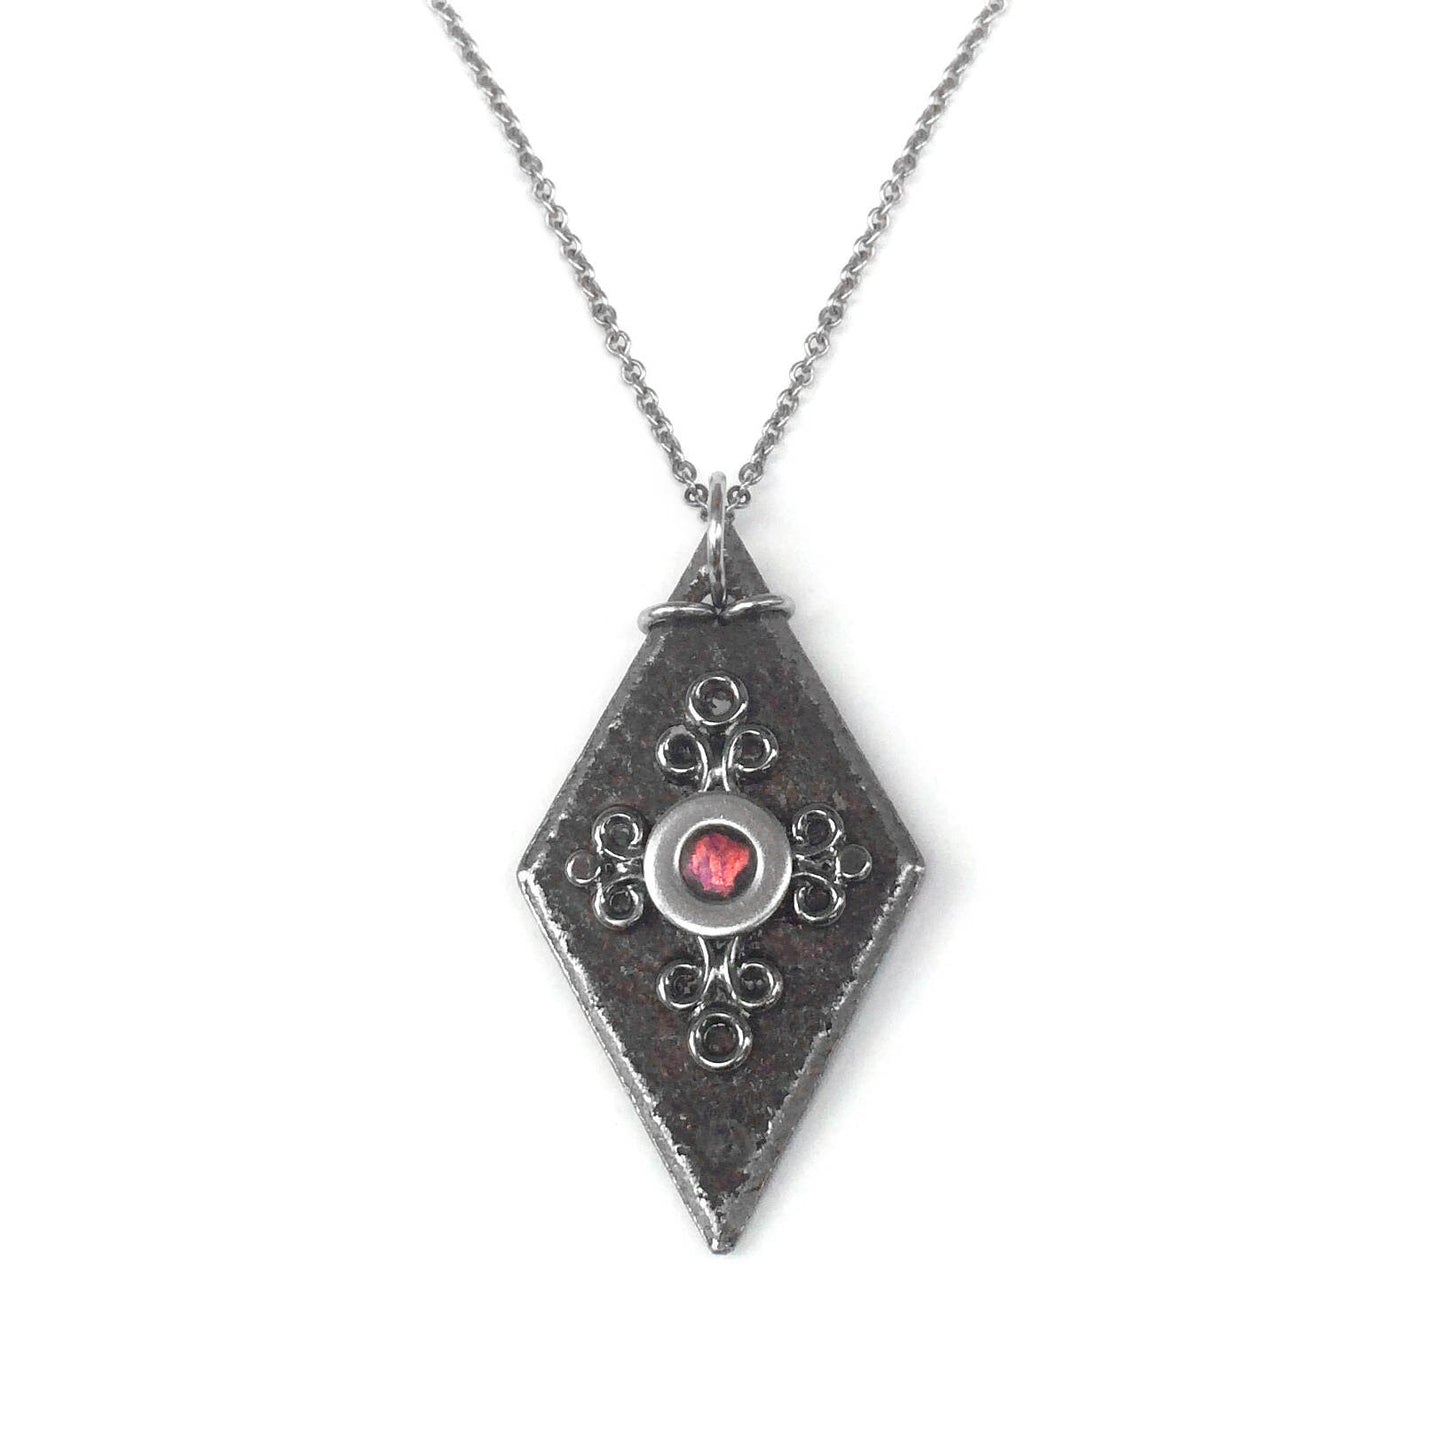 As seen on The Vampire Diaries Bonnie Necklace, Medieval Black Diamond Shaped Pendant, Crimson Red and Black Jewelry  Stainless Steel Chain